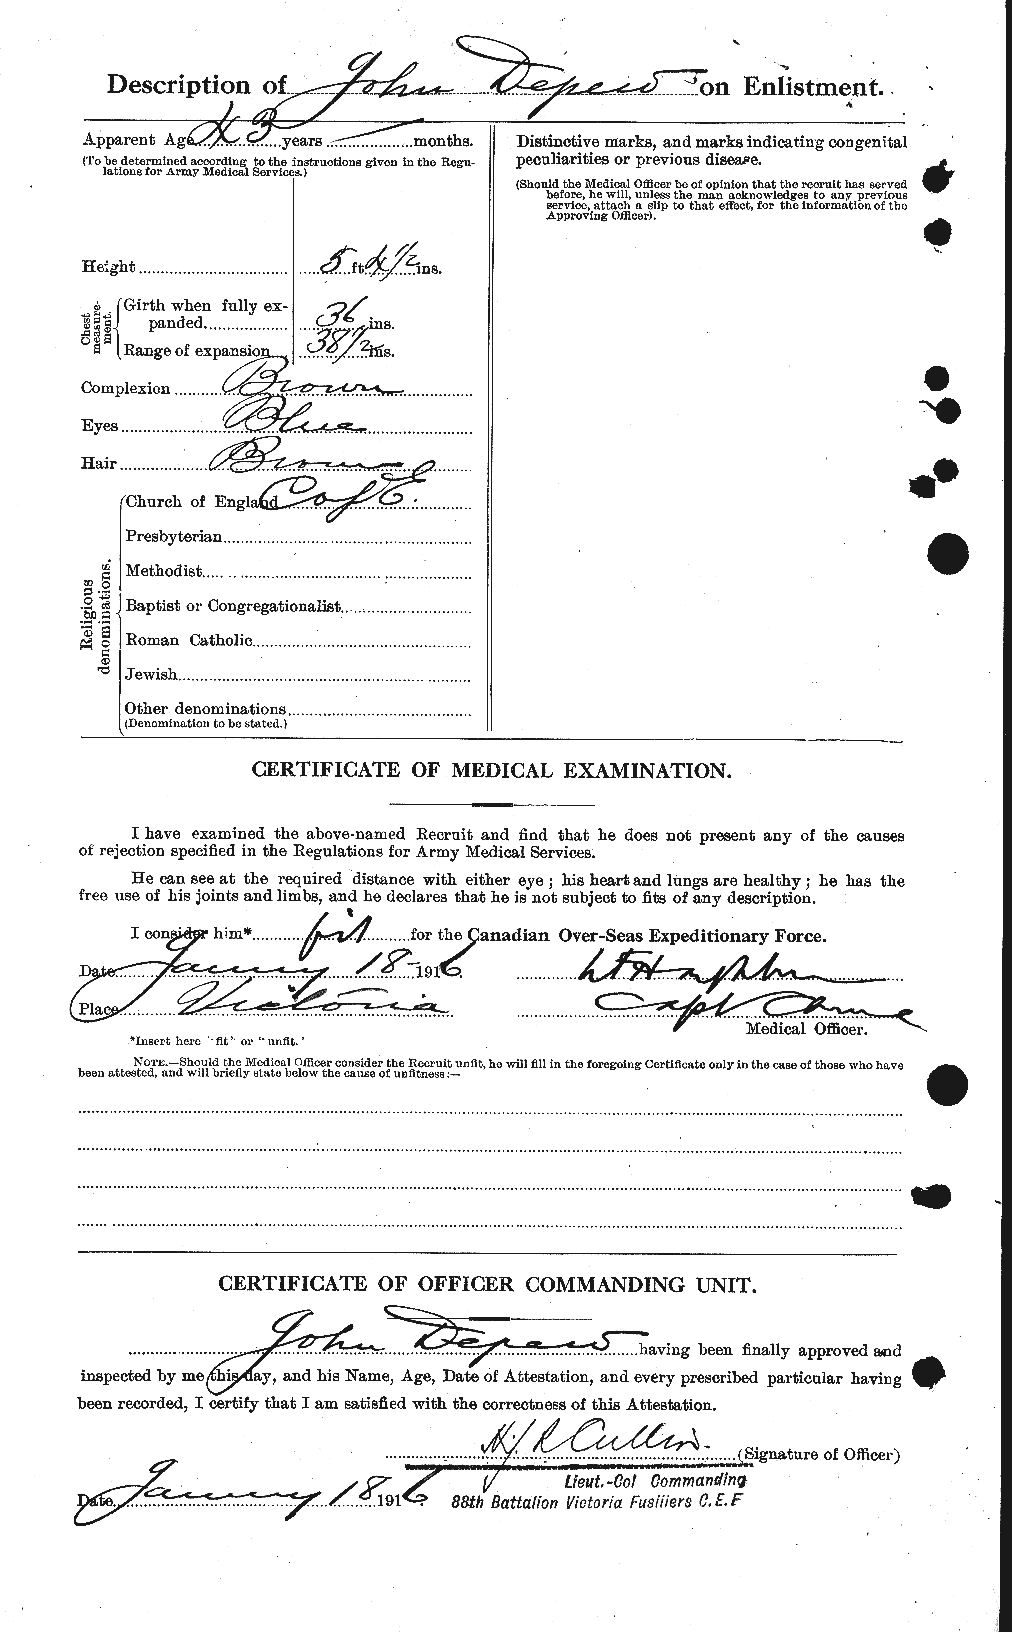 Personnel Records of the First World War - CEF 288994b